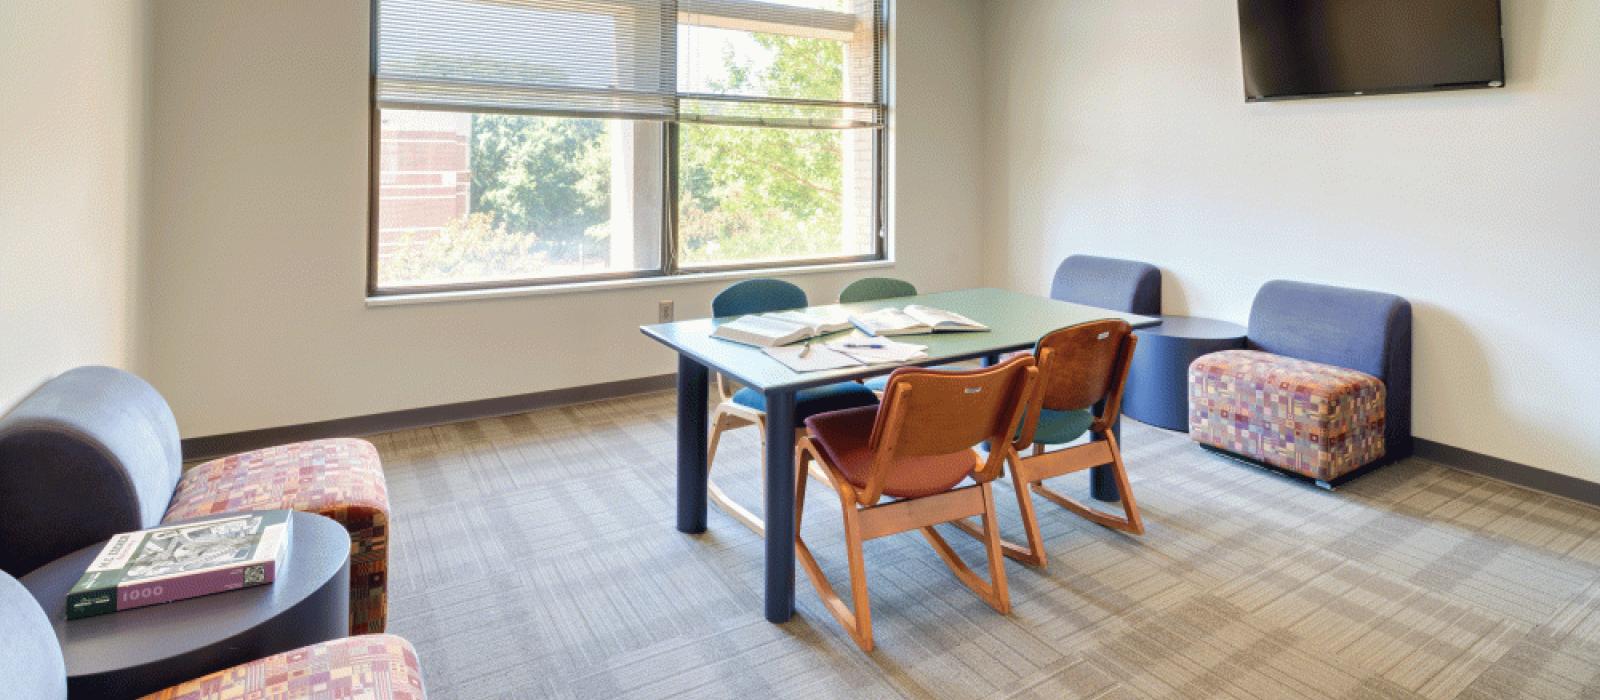 Study room: Table with 4 chairs, double windows and 2 sets of chairs with tables.